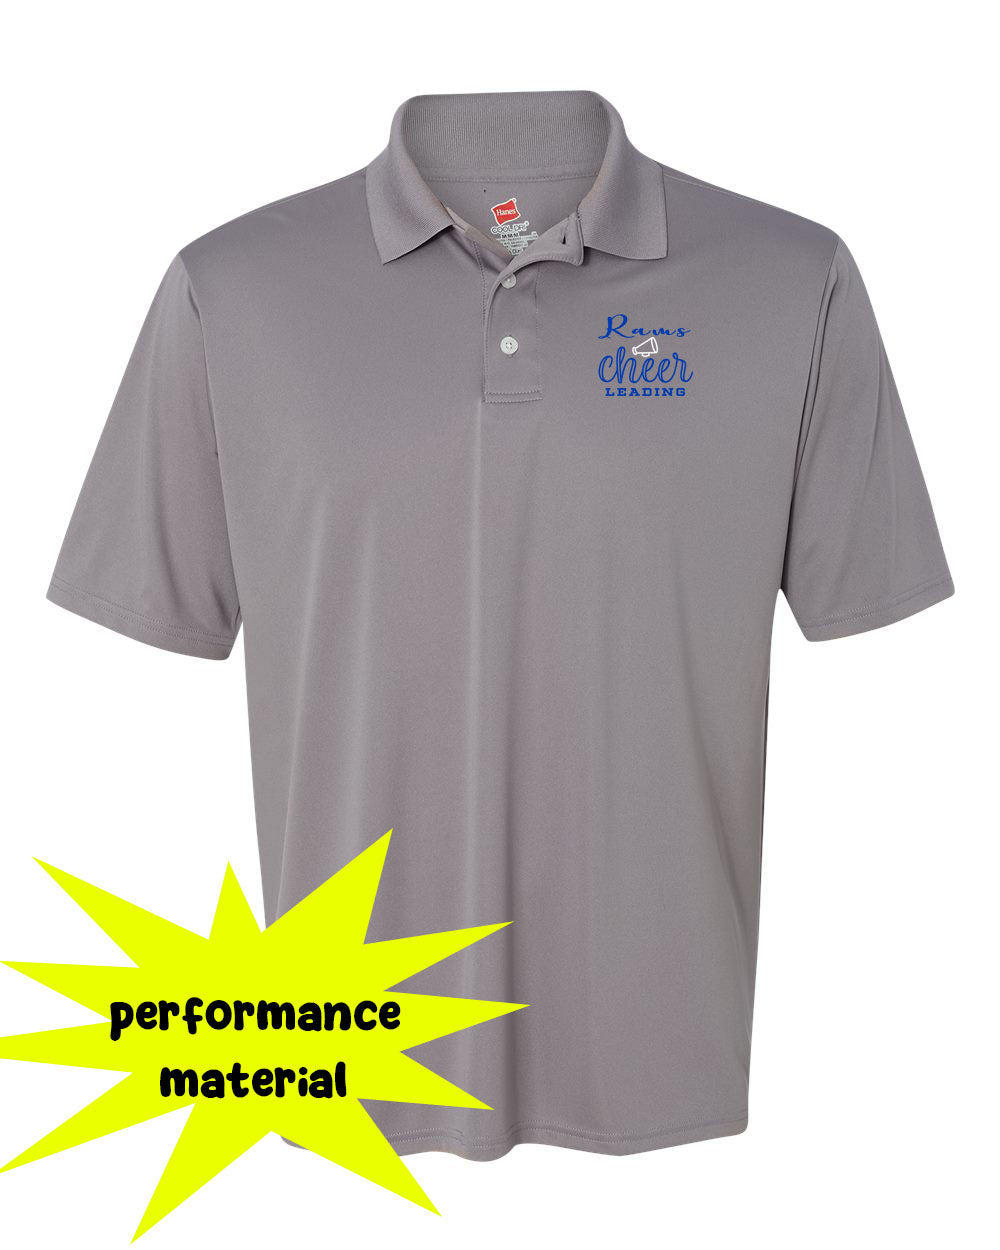 Franklin Cheer Performance Material Polo T-Shirt Design 2